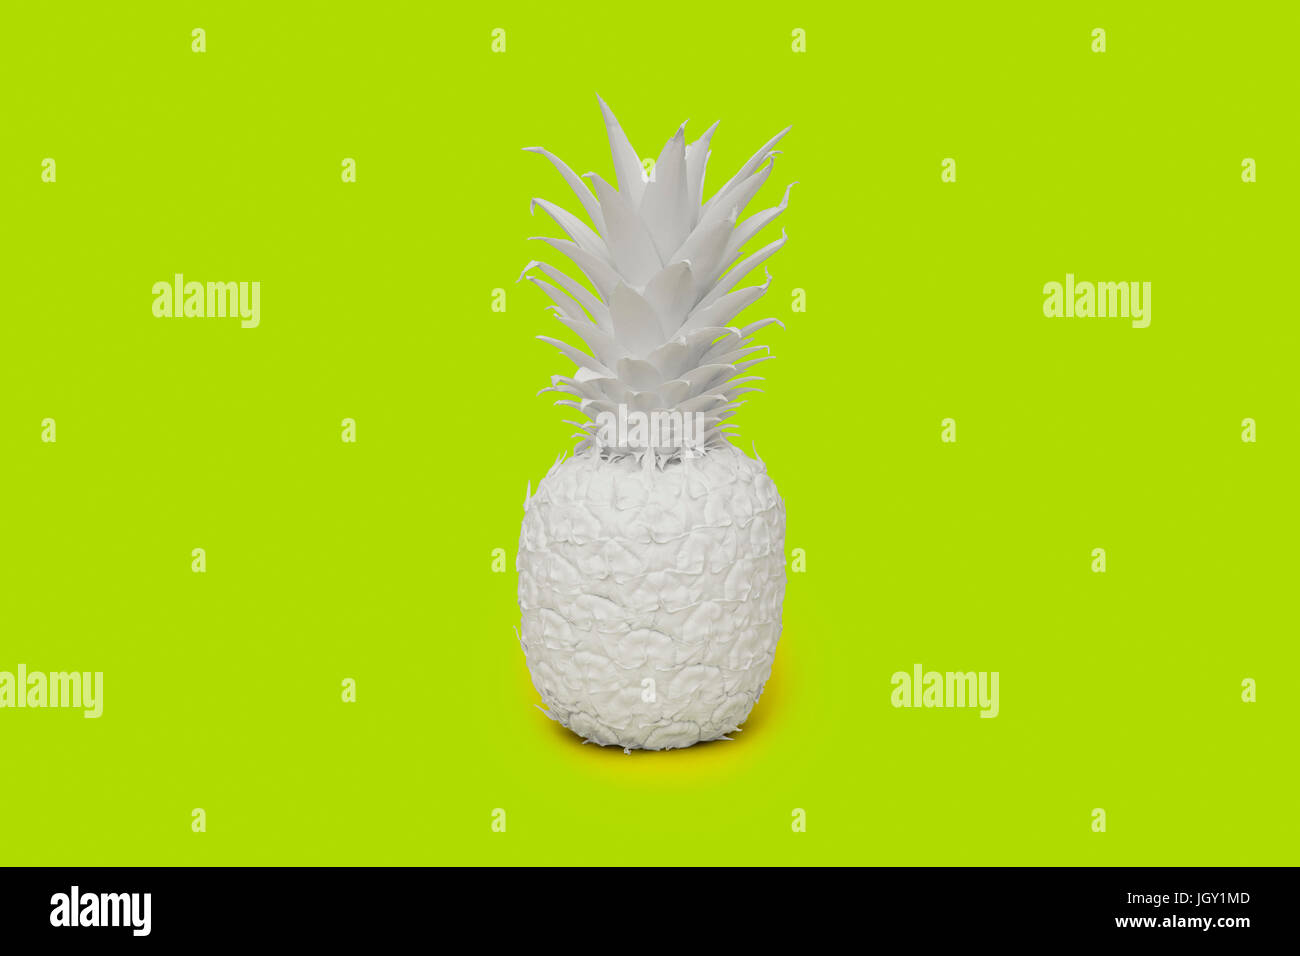 Pineapple painted white on lime green background Stock Photo